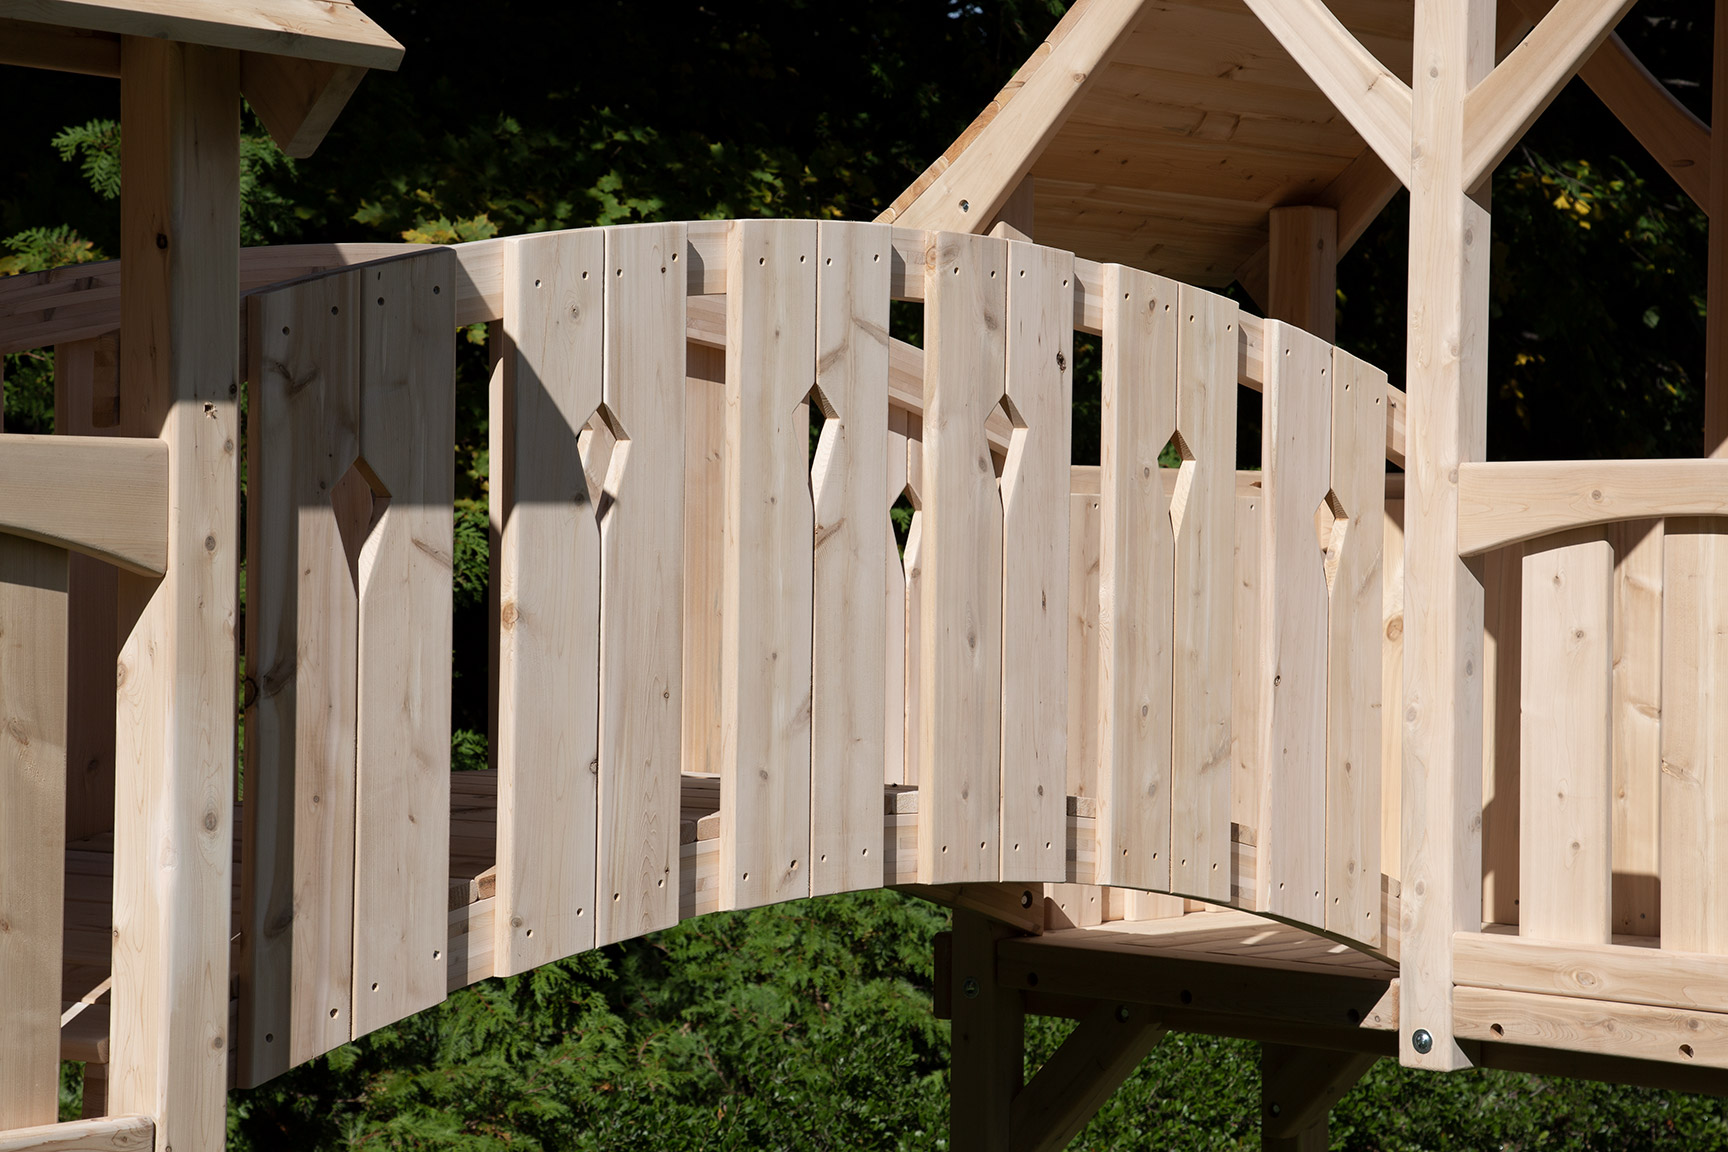 Arched diamond bridge conneting two play set forts